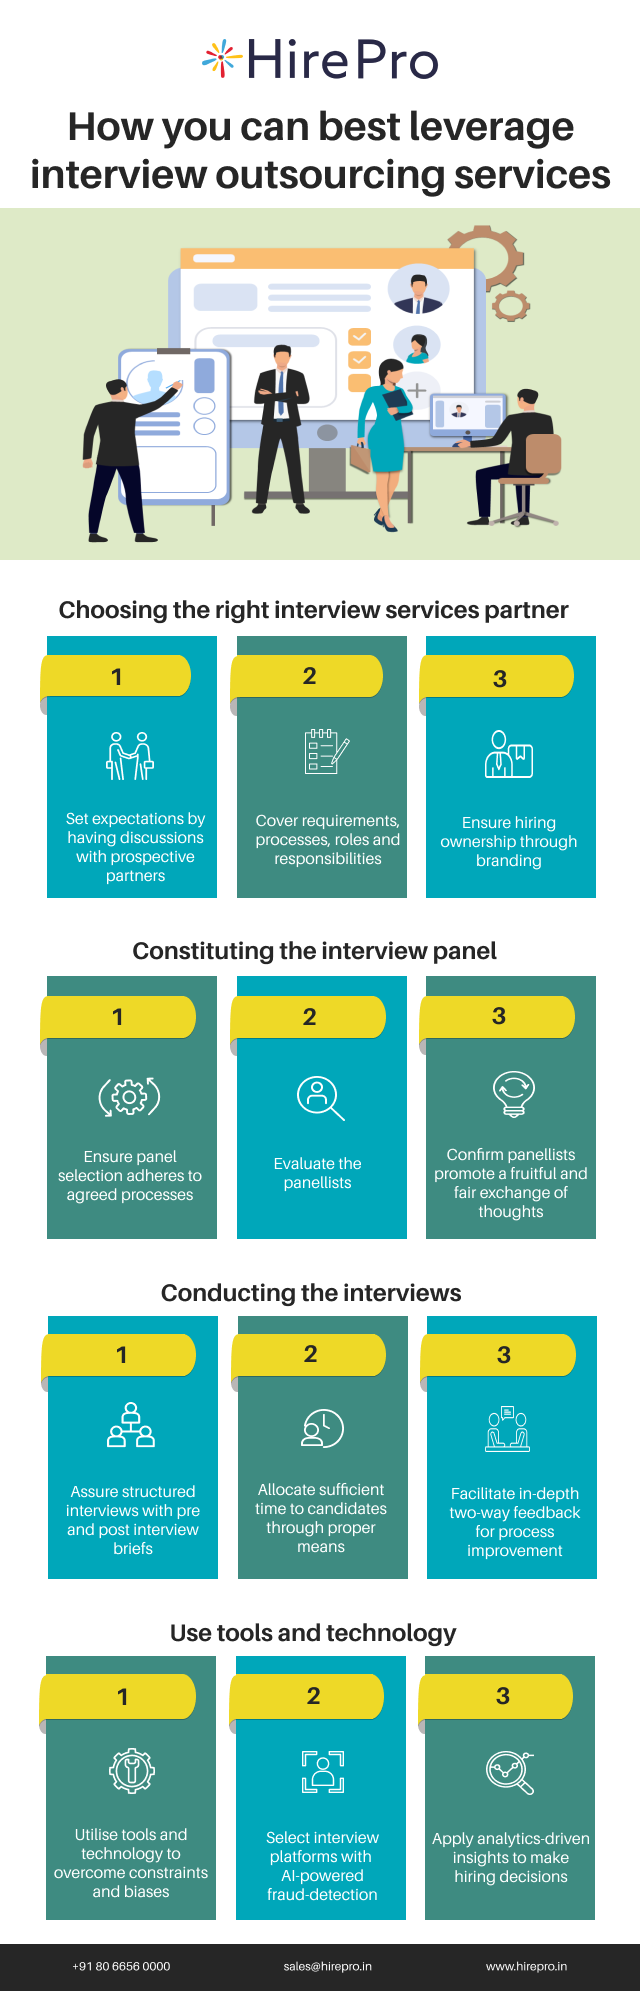 How you can best leverage interview outsourcing services